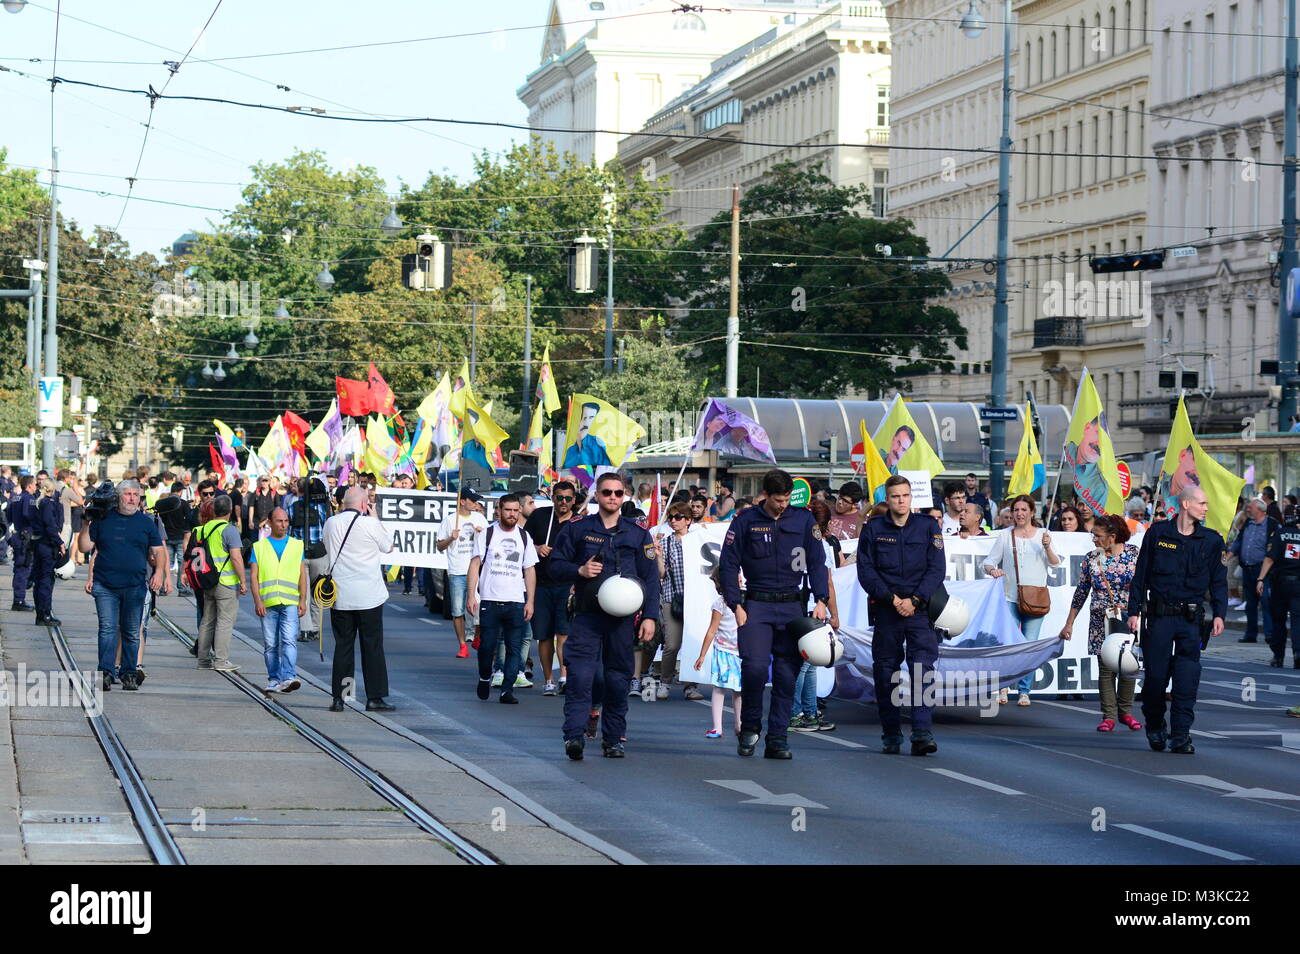 Vienne, Austria. August 20th, 2016. Kurds demonstrate in Vienna against human rights violations in Turkey and the isolation of Abdullah Öcalan. © Franz Perc/Alamy Live News Stock Photo